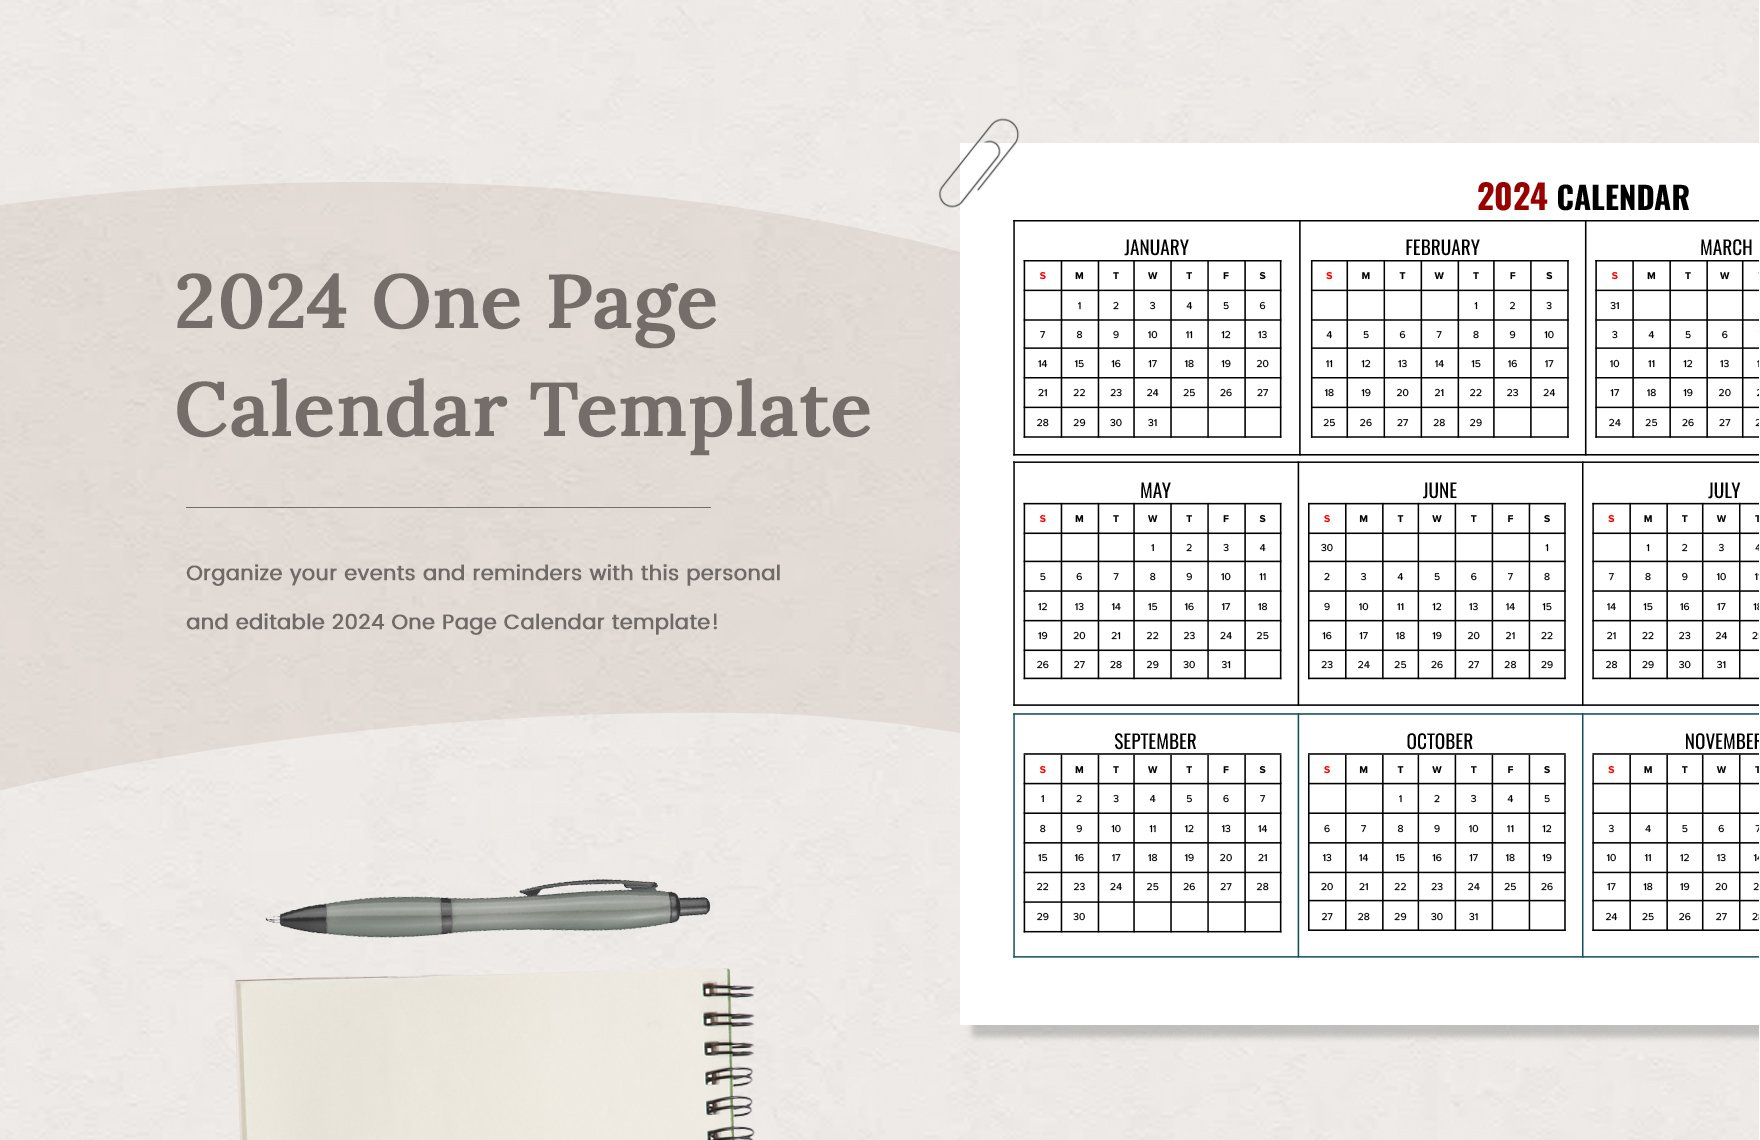 2024 One Page Calendar Template - Download In Word, Google Docs | Printable Calendar 2024 One Page Word